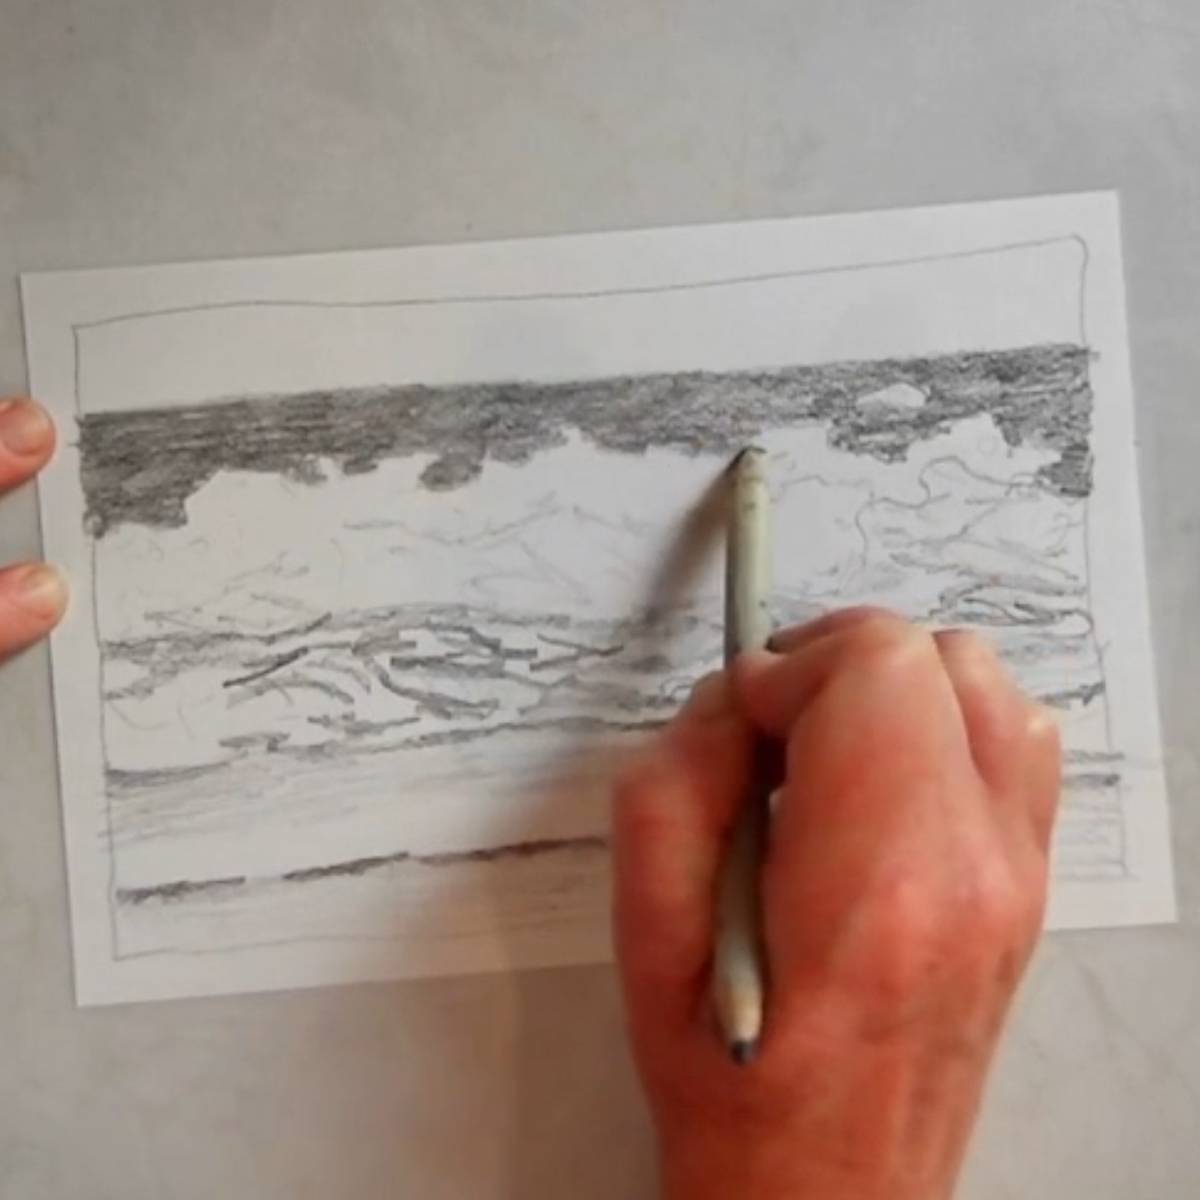 A hand using a blending stump to blend pencil shading in an oceans cape.